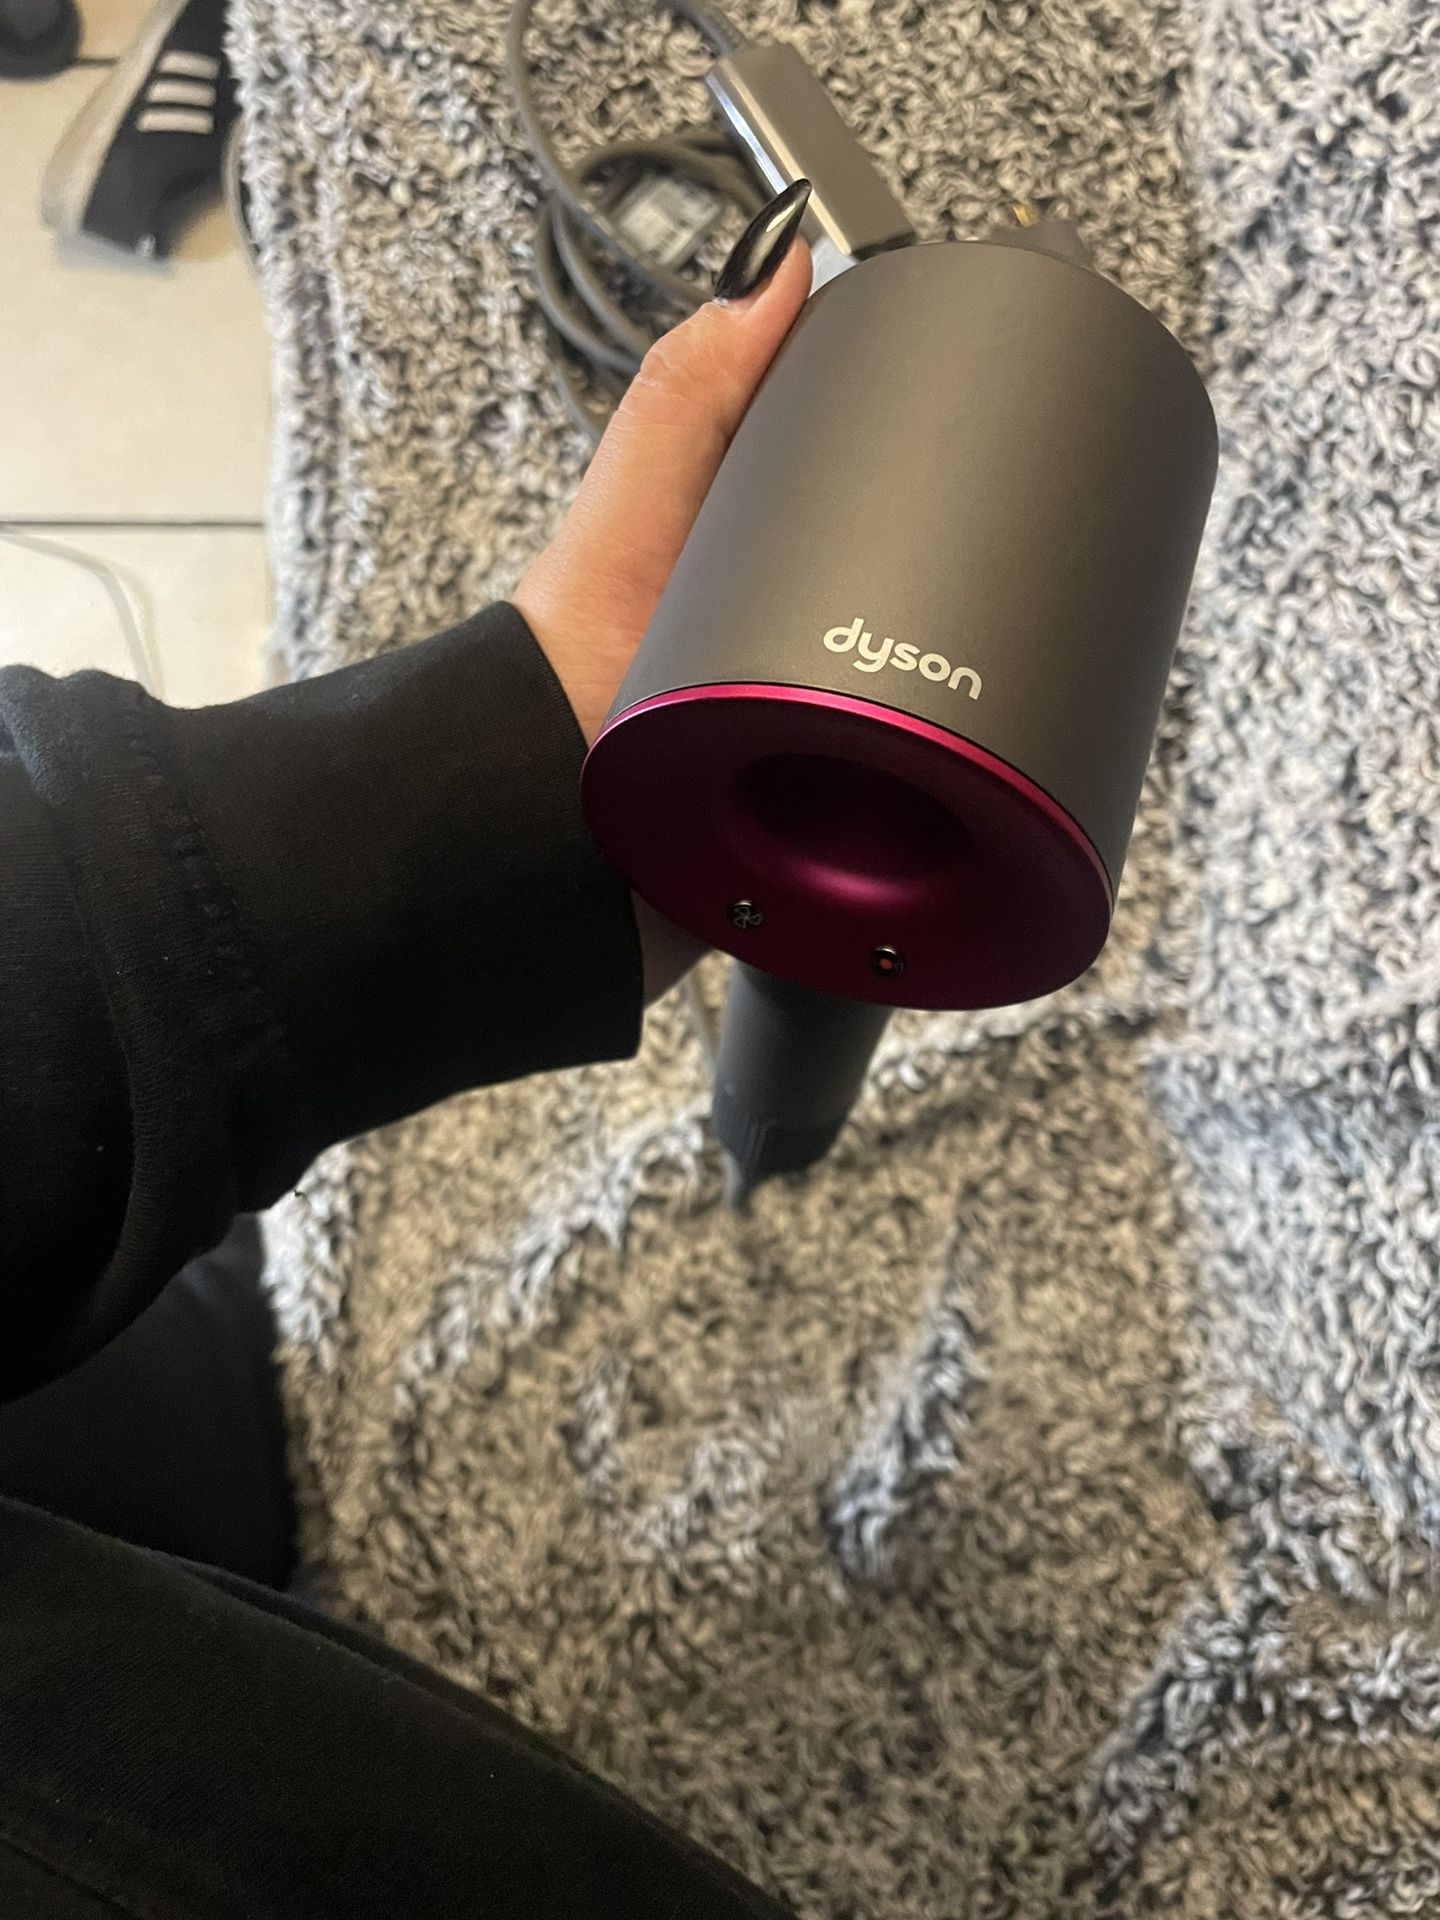 DYSON Blow Dryer Only 